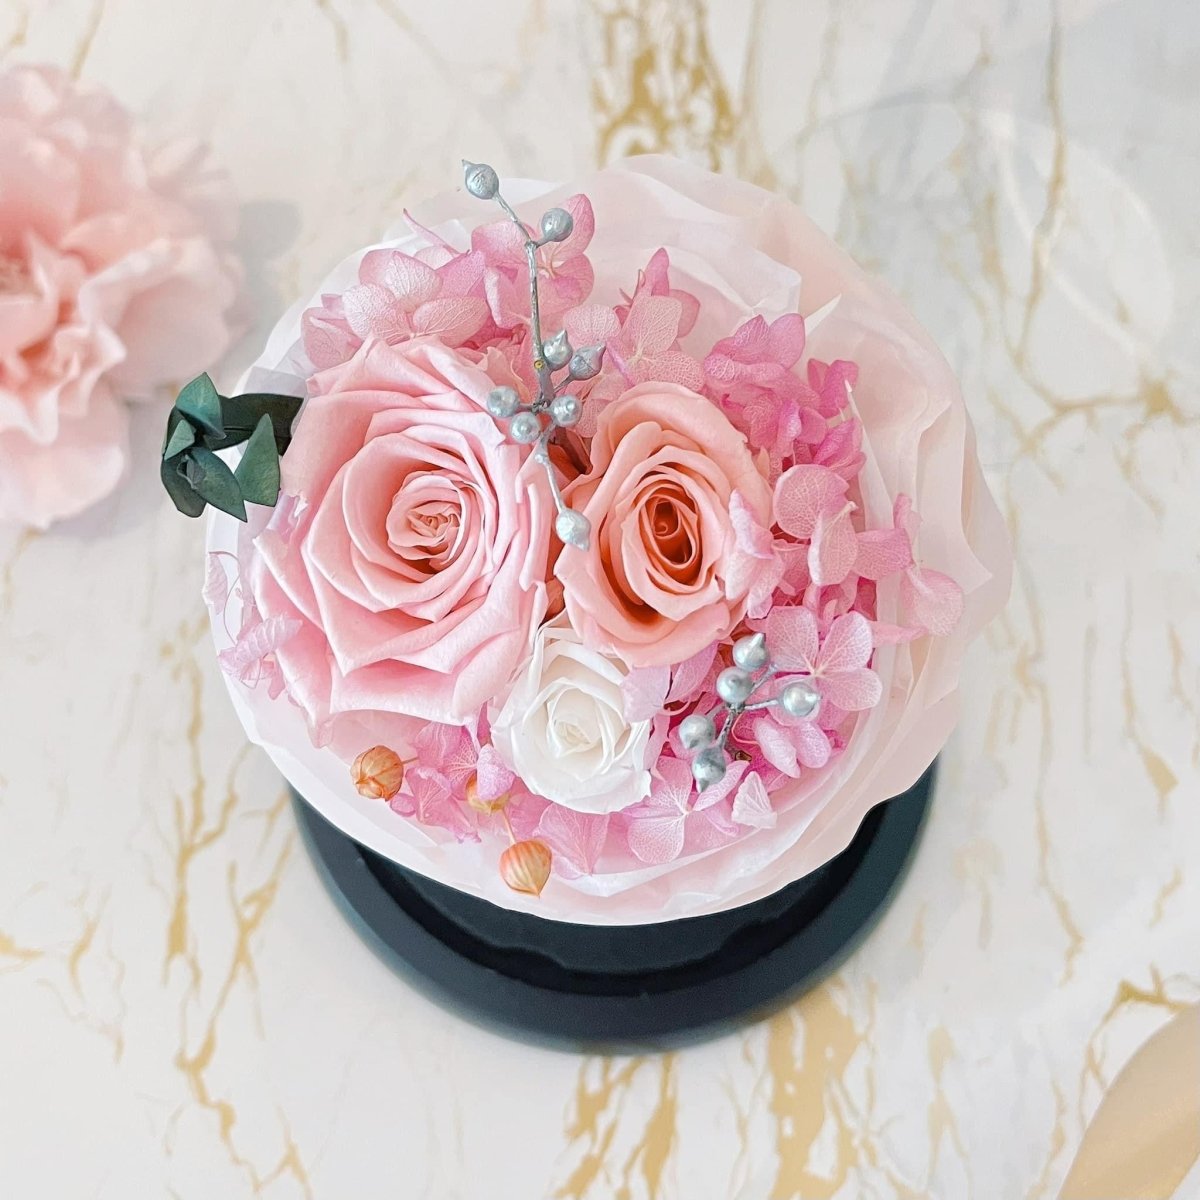 Rose Bouquet Dome - Everlasting Flower Bouquet (Real Preserved Roses and Dried Flowers) - Rainbowly Fresh Fruit Gift and Flower Arrangments